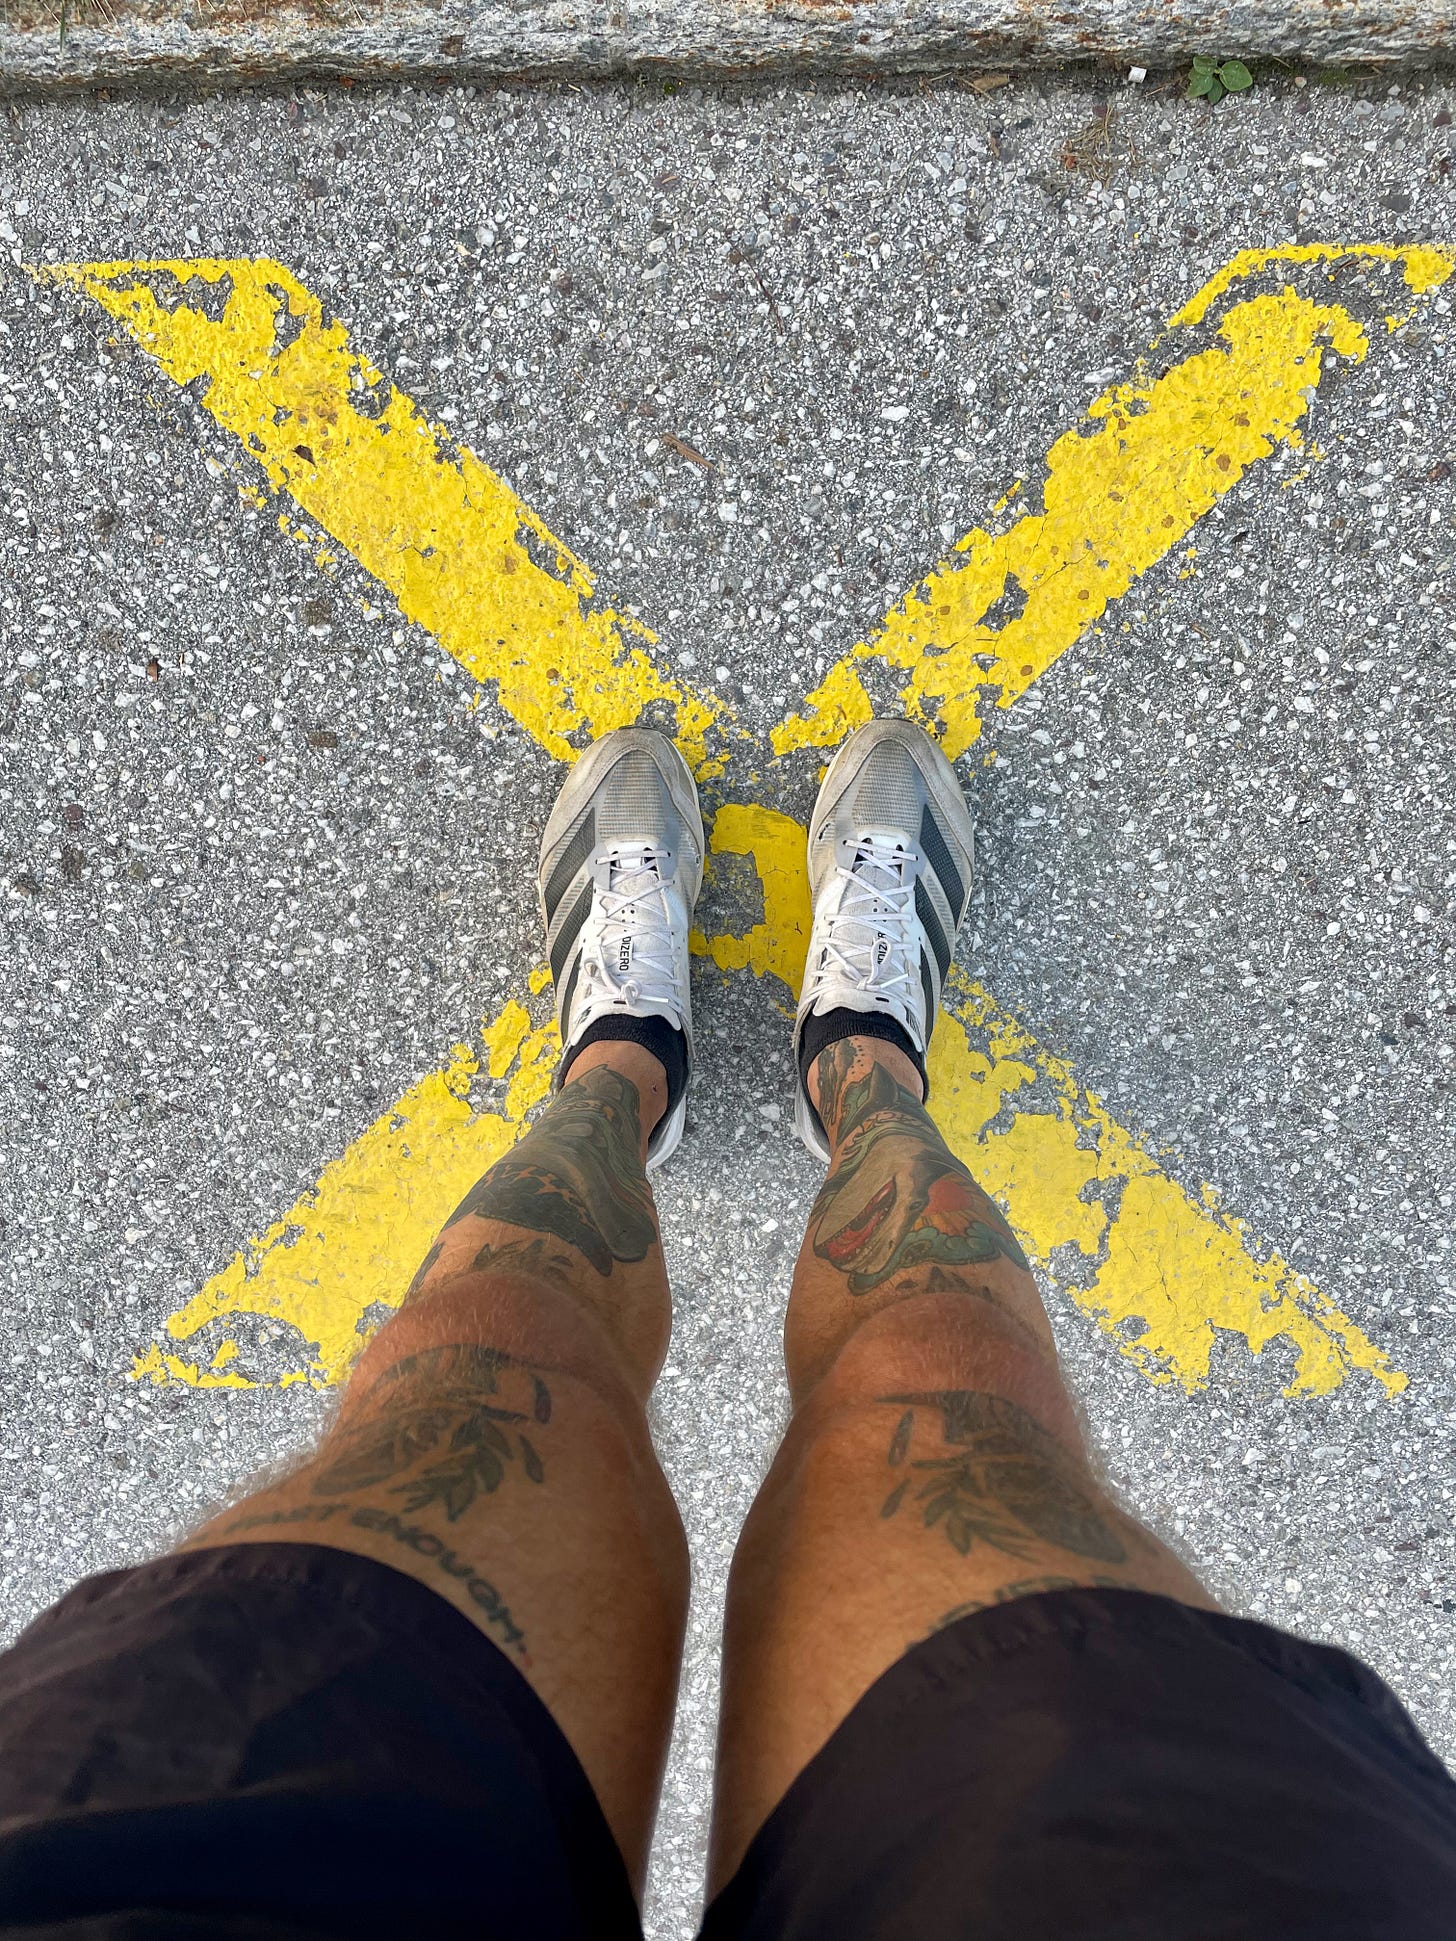 The author standing on an "X" painted on the ground wearing his favorite running shoes